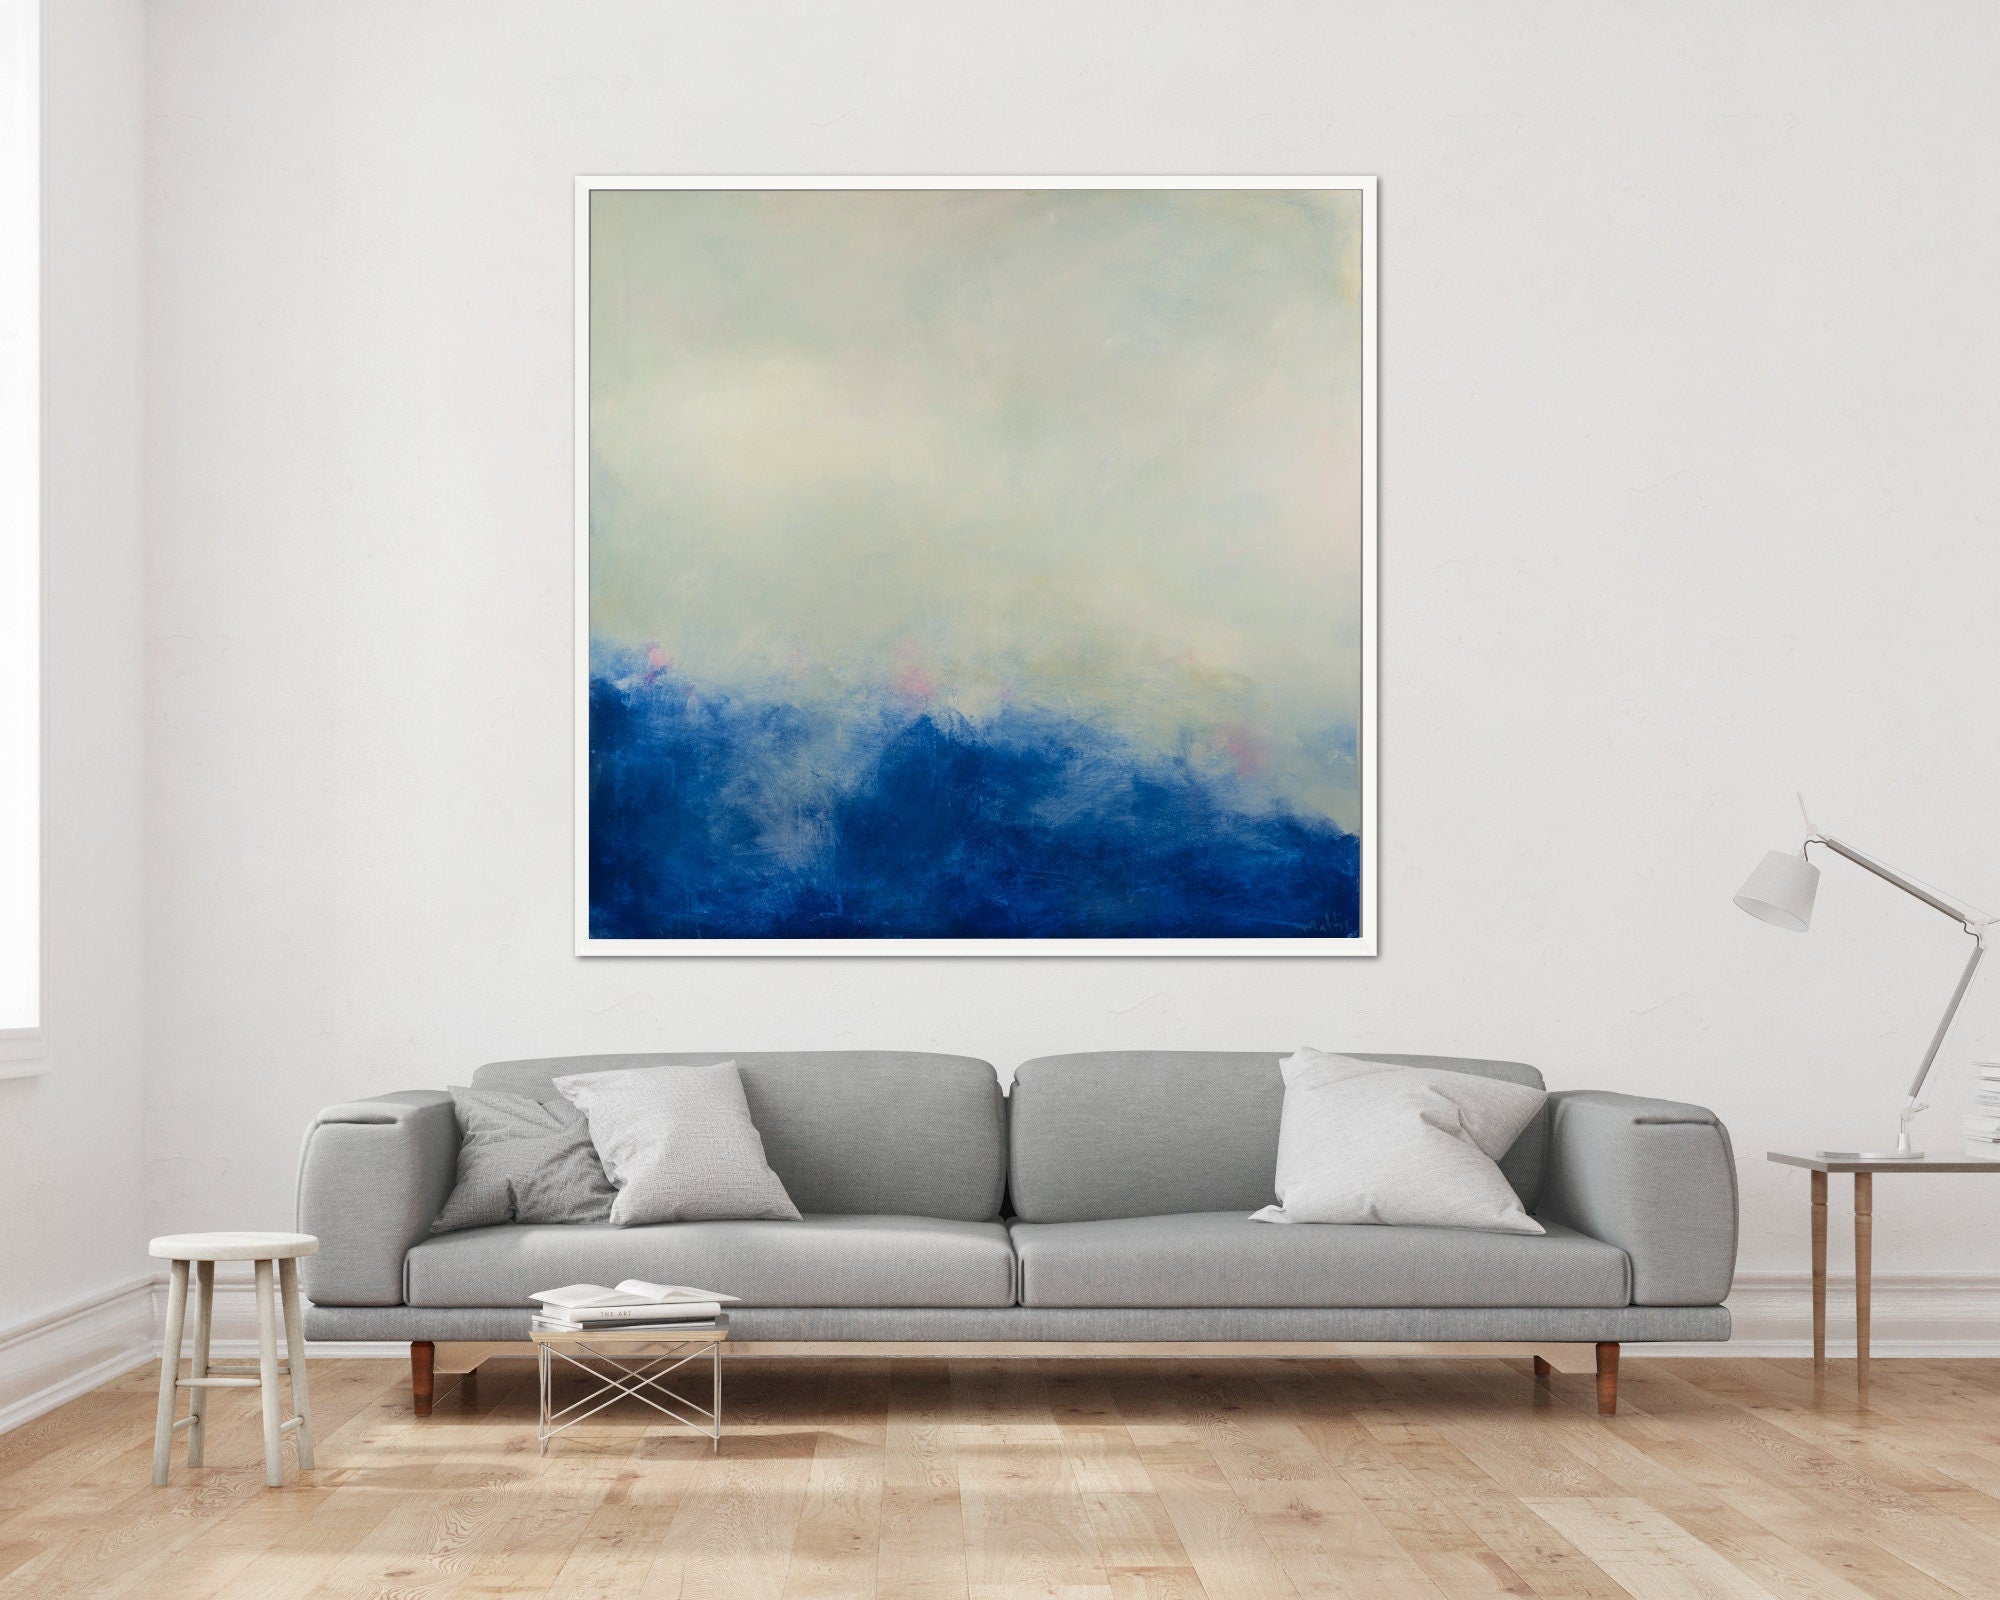 Large Ocean abstract painting, seascape paintings on canvas, Sea Wave Original Abstract Canvas, Sky Abstract Landscape